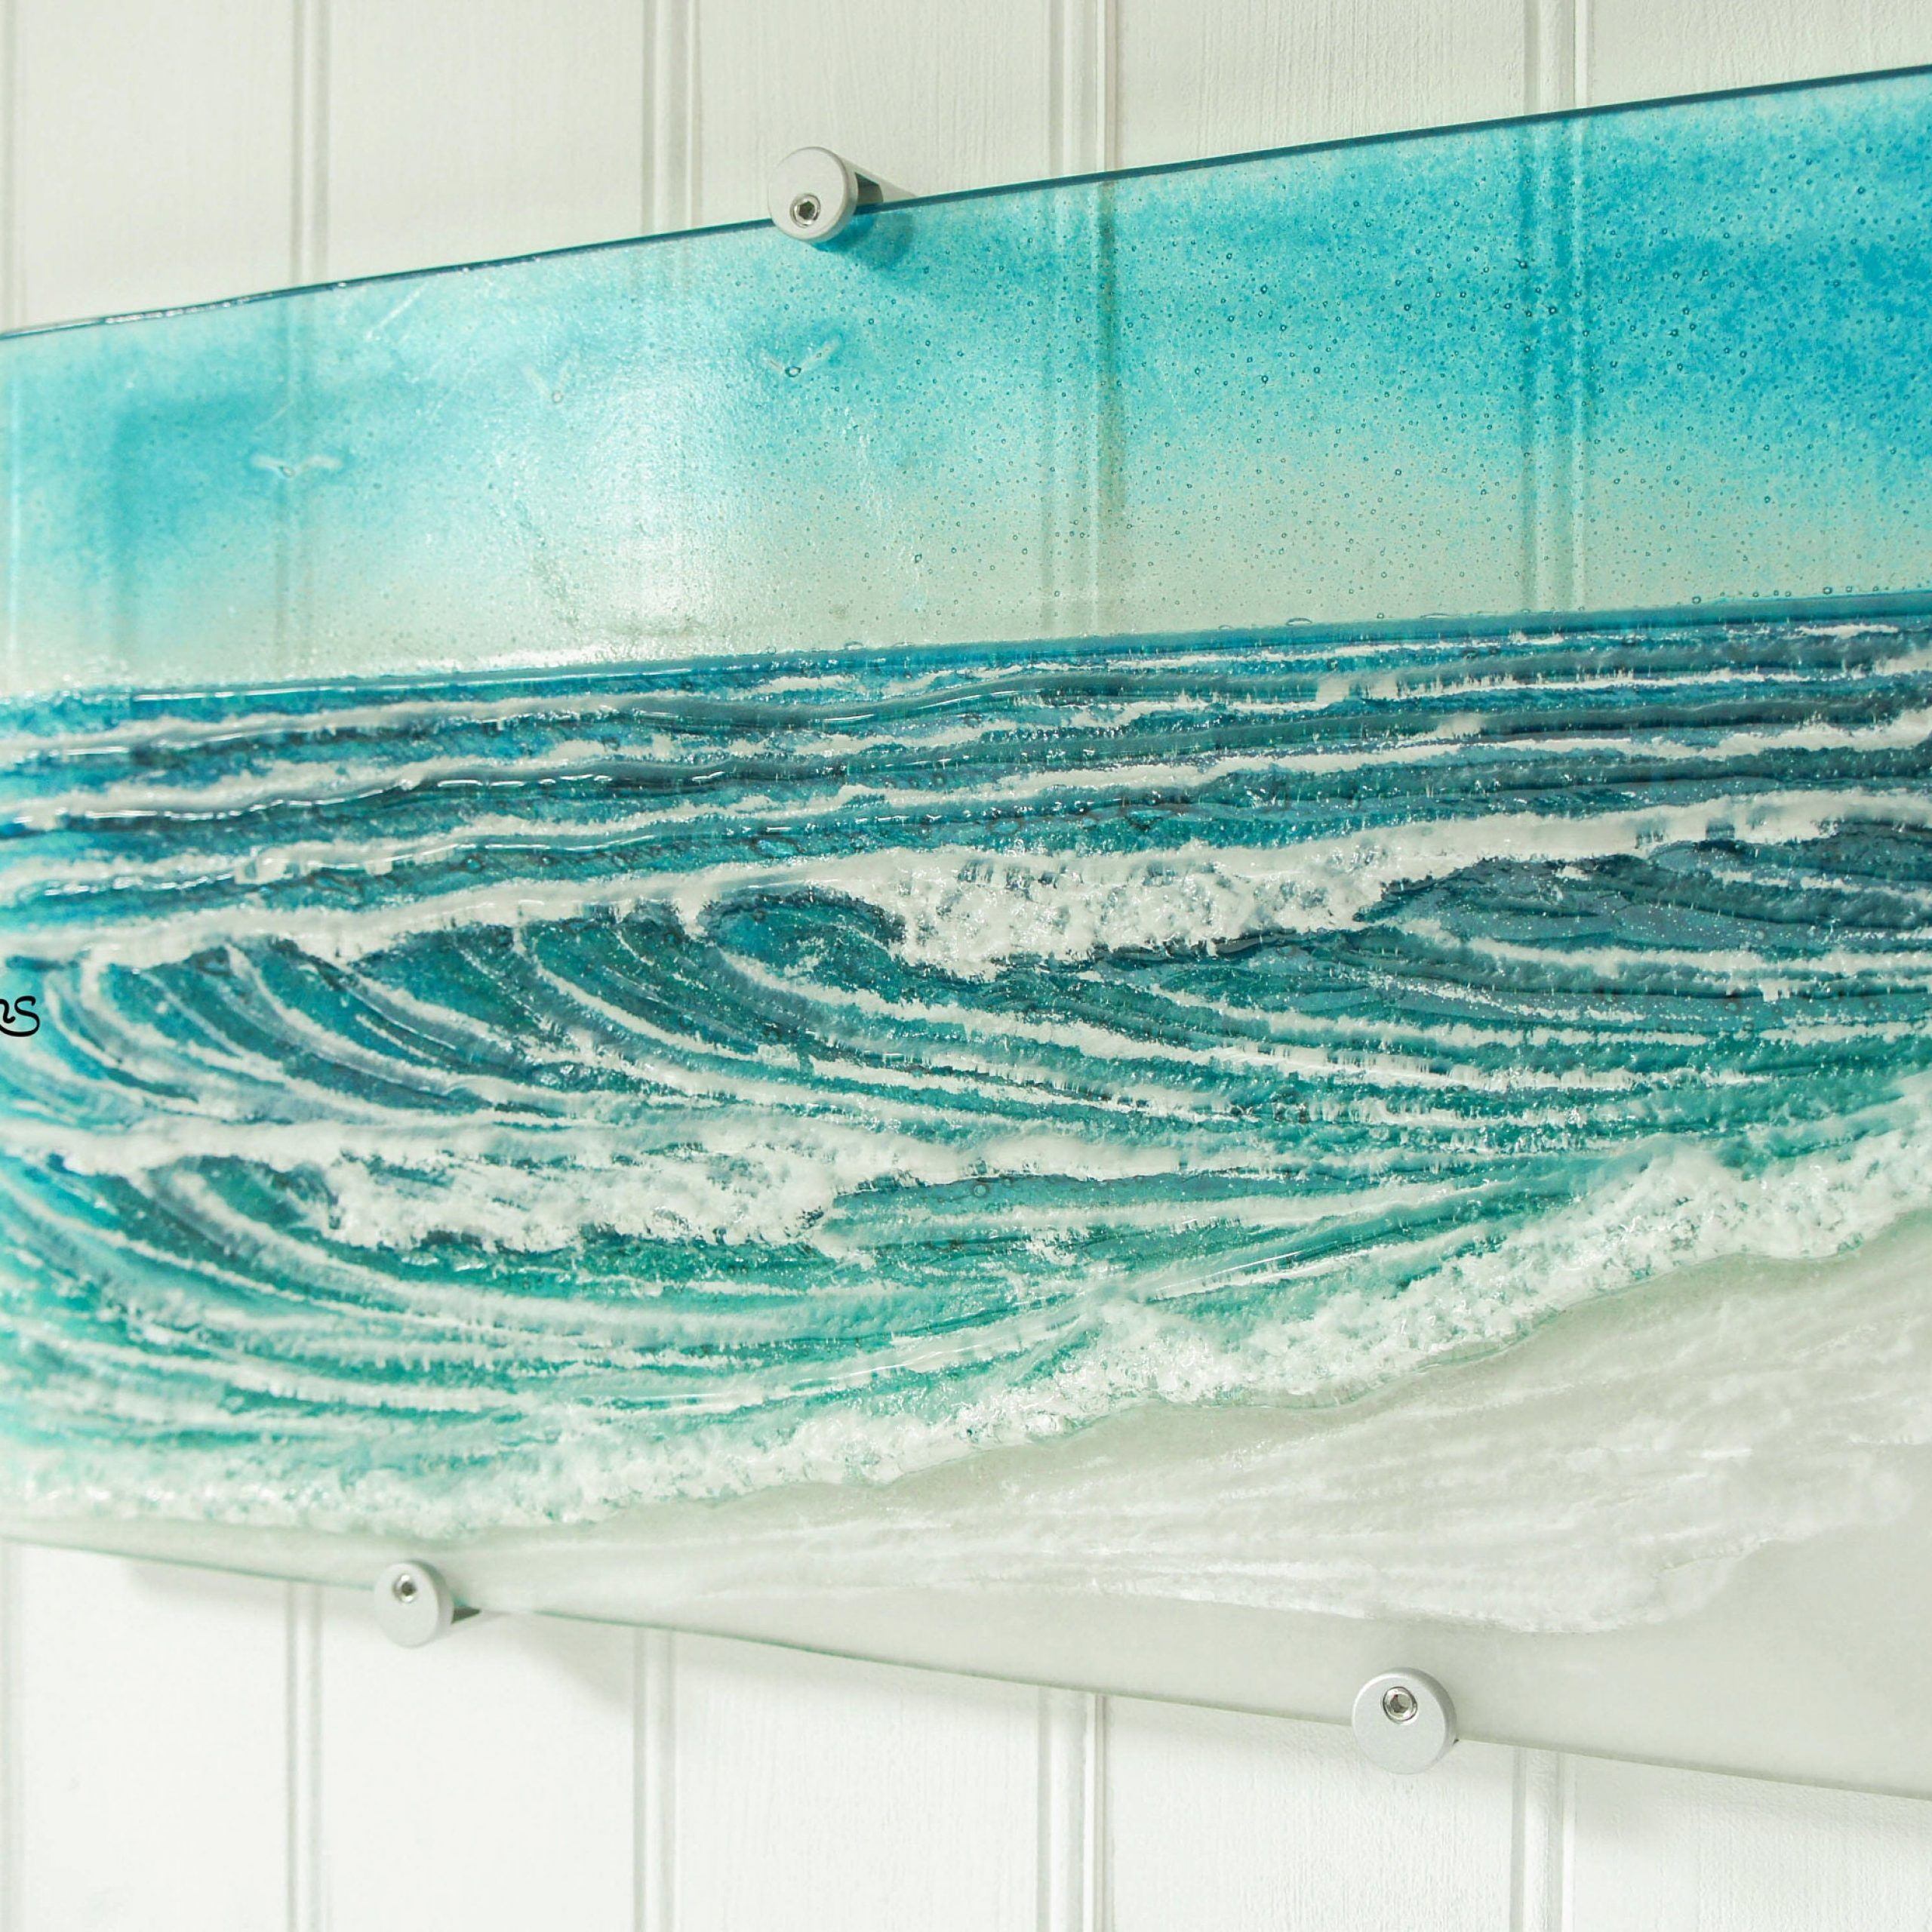 Large Wave Wall Art 44cmx26cm 17x10 Panneau De Vague En – Etsy France With Regard To Most Recently Released Waves Wall Art (View 1 of 20)